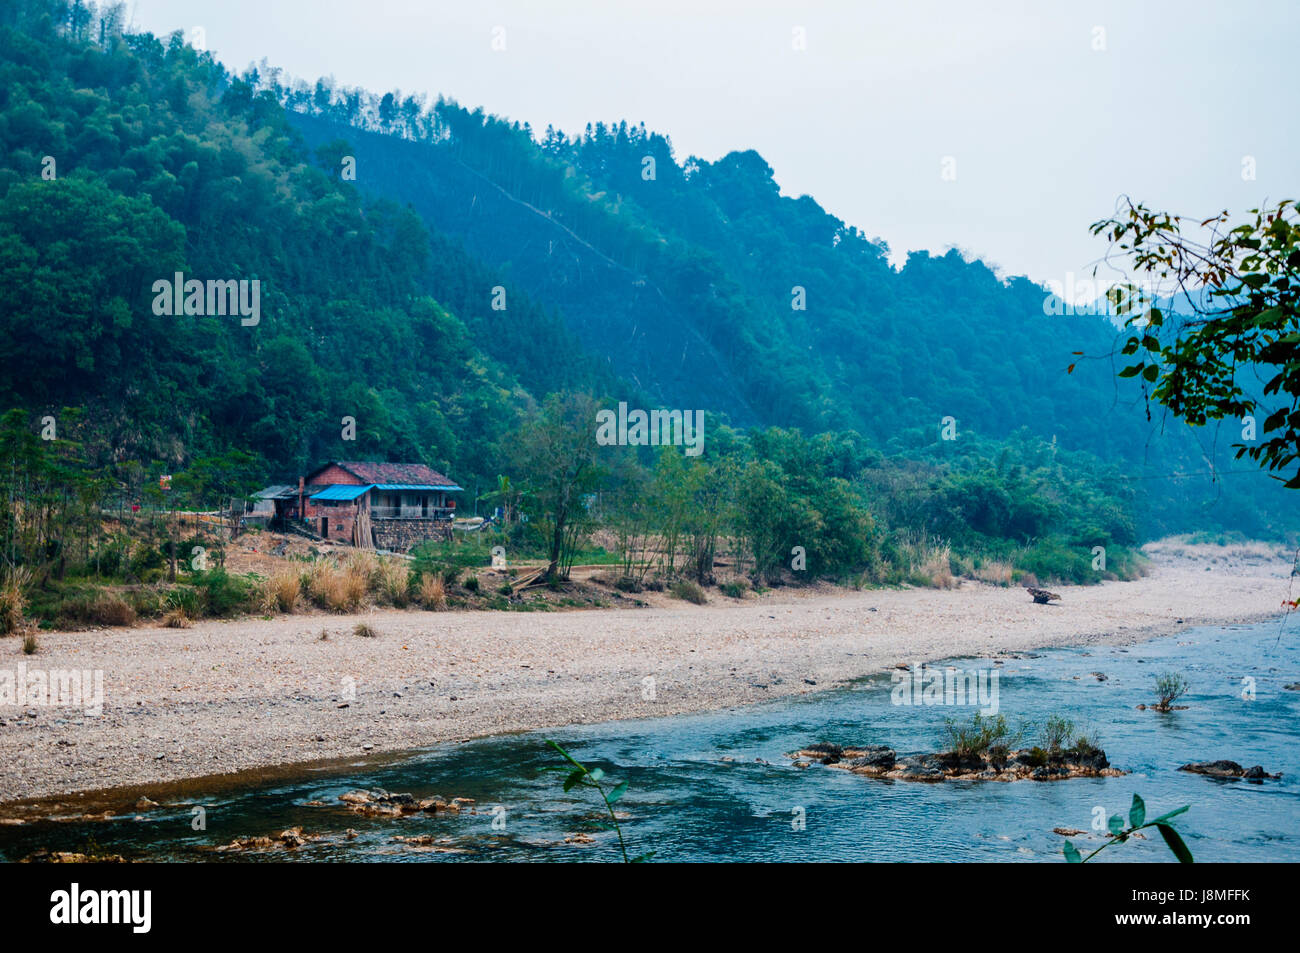 Mountains and river scenery in mist Stock Photo